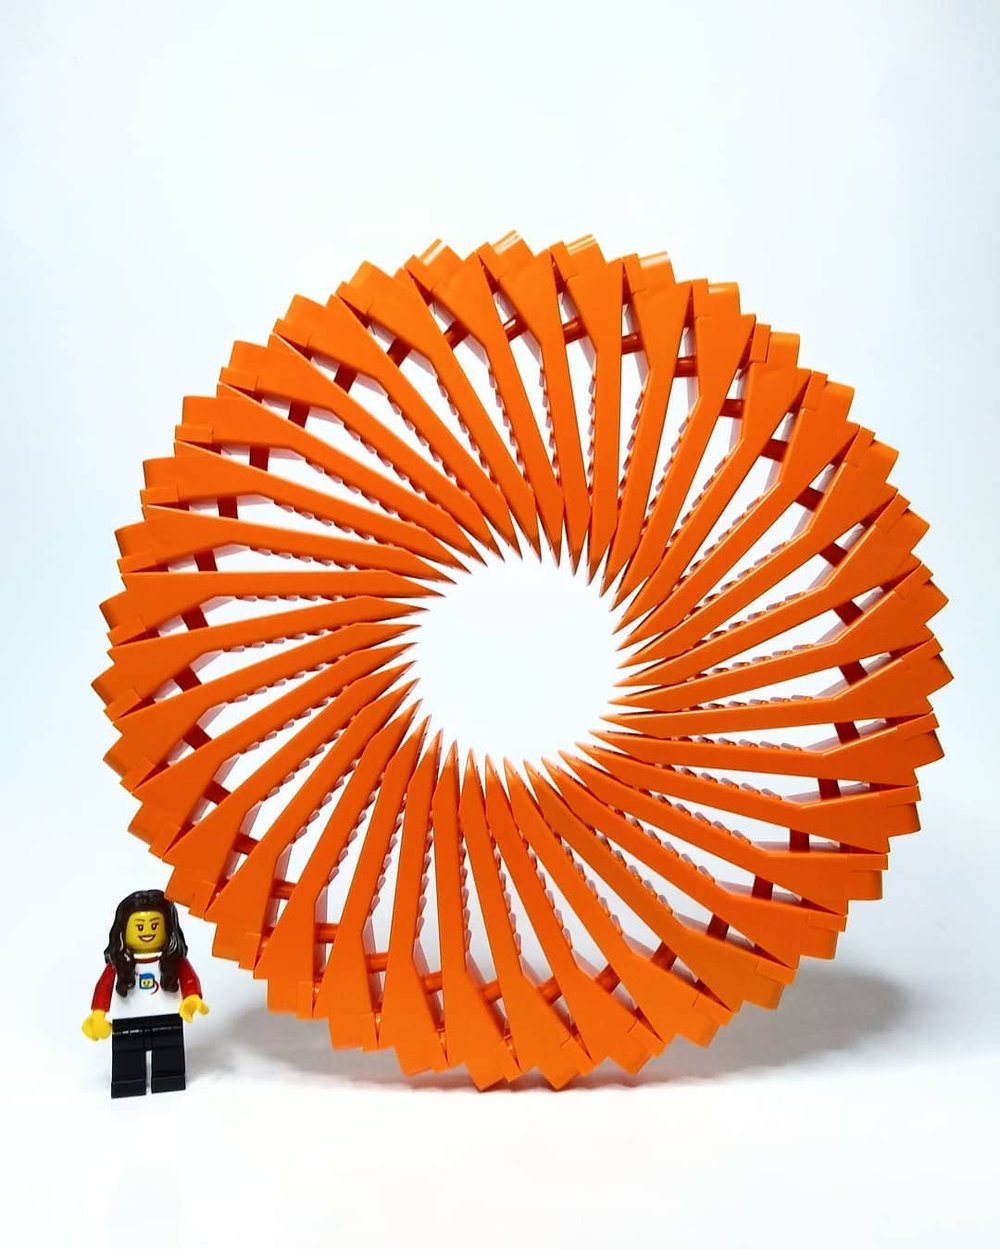 EVERYTHING YOU NEED TO KNOW ABOUT THE BRICK SEPARATOR - LEGO 